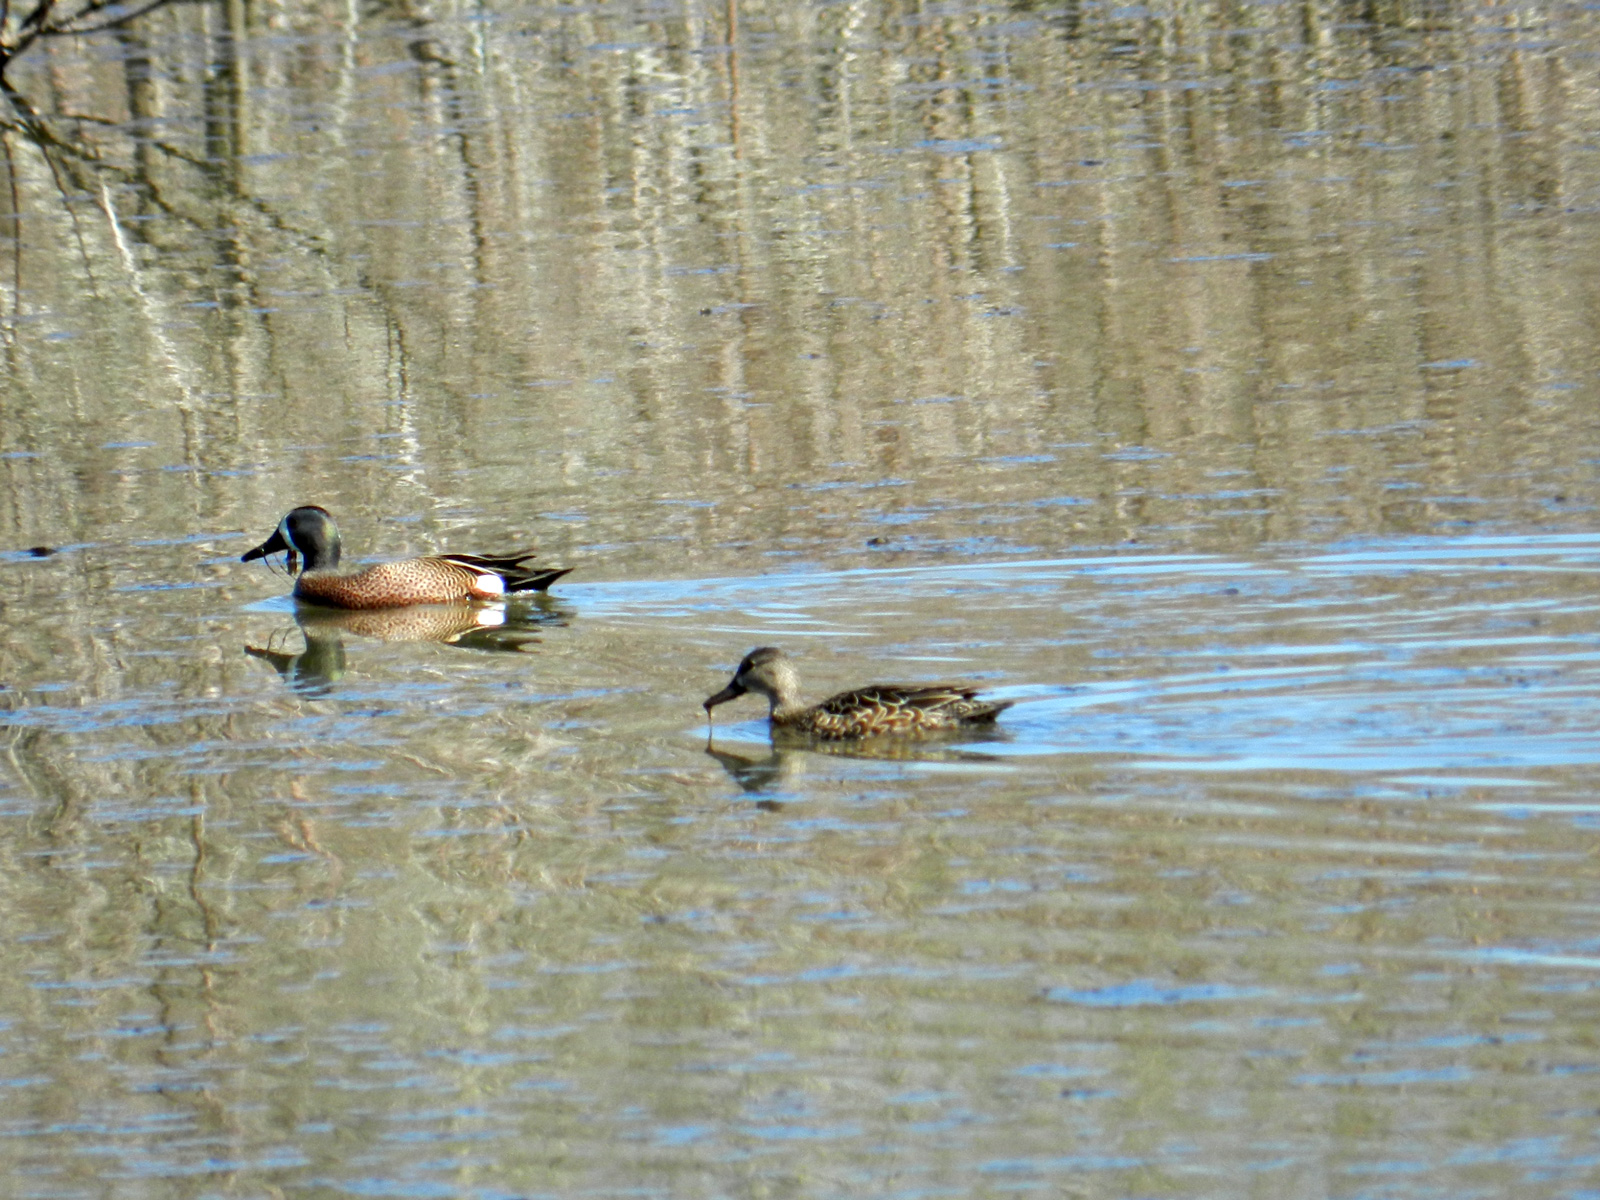 The blue-winged teal